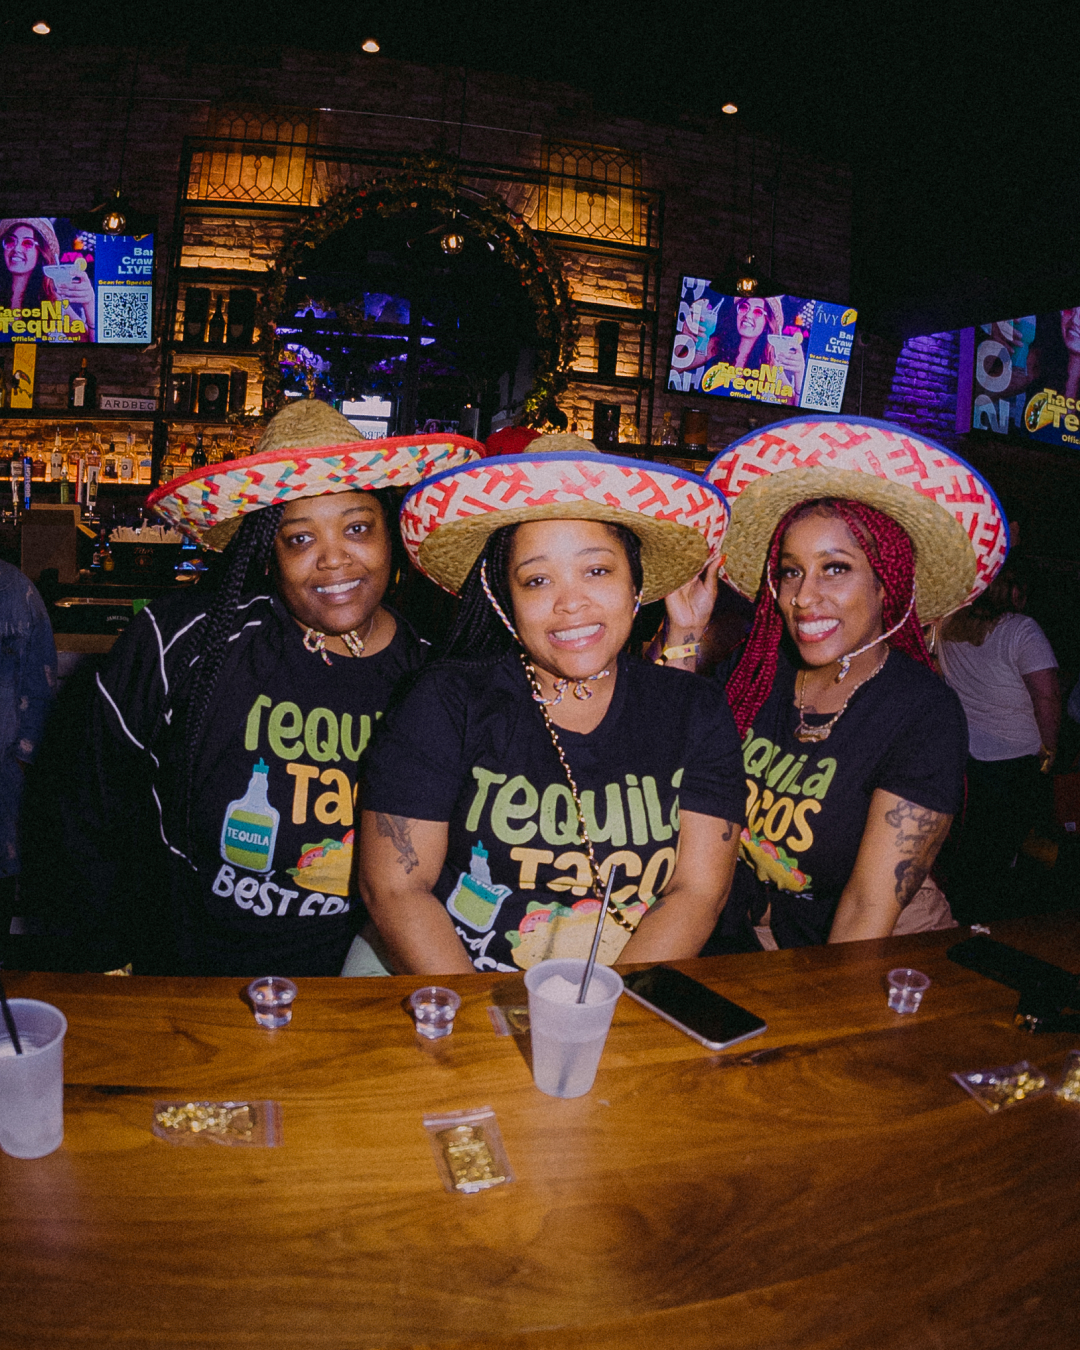 3 girls in sombrero hats sitting at a bar getting ready to take a tequila shot during the tacos and tequila bar crawl wearing a tshirt that says "Tequila Tacos and Best Friends"